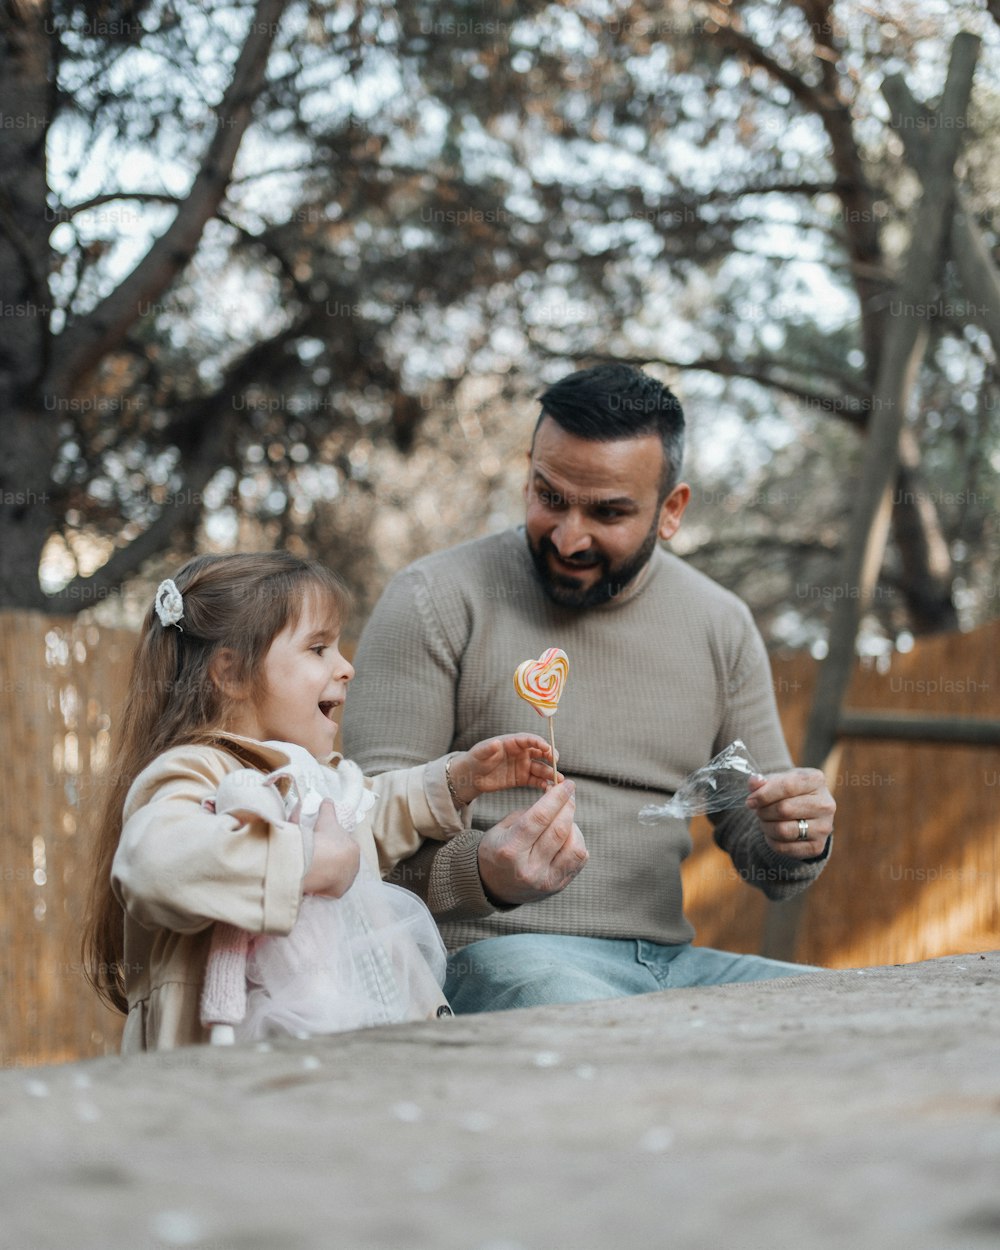 a man sitting next to a little girl holding a piece of pizza